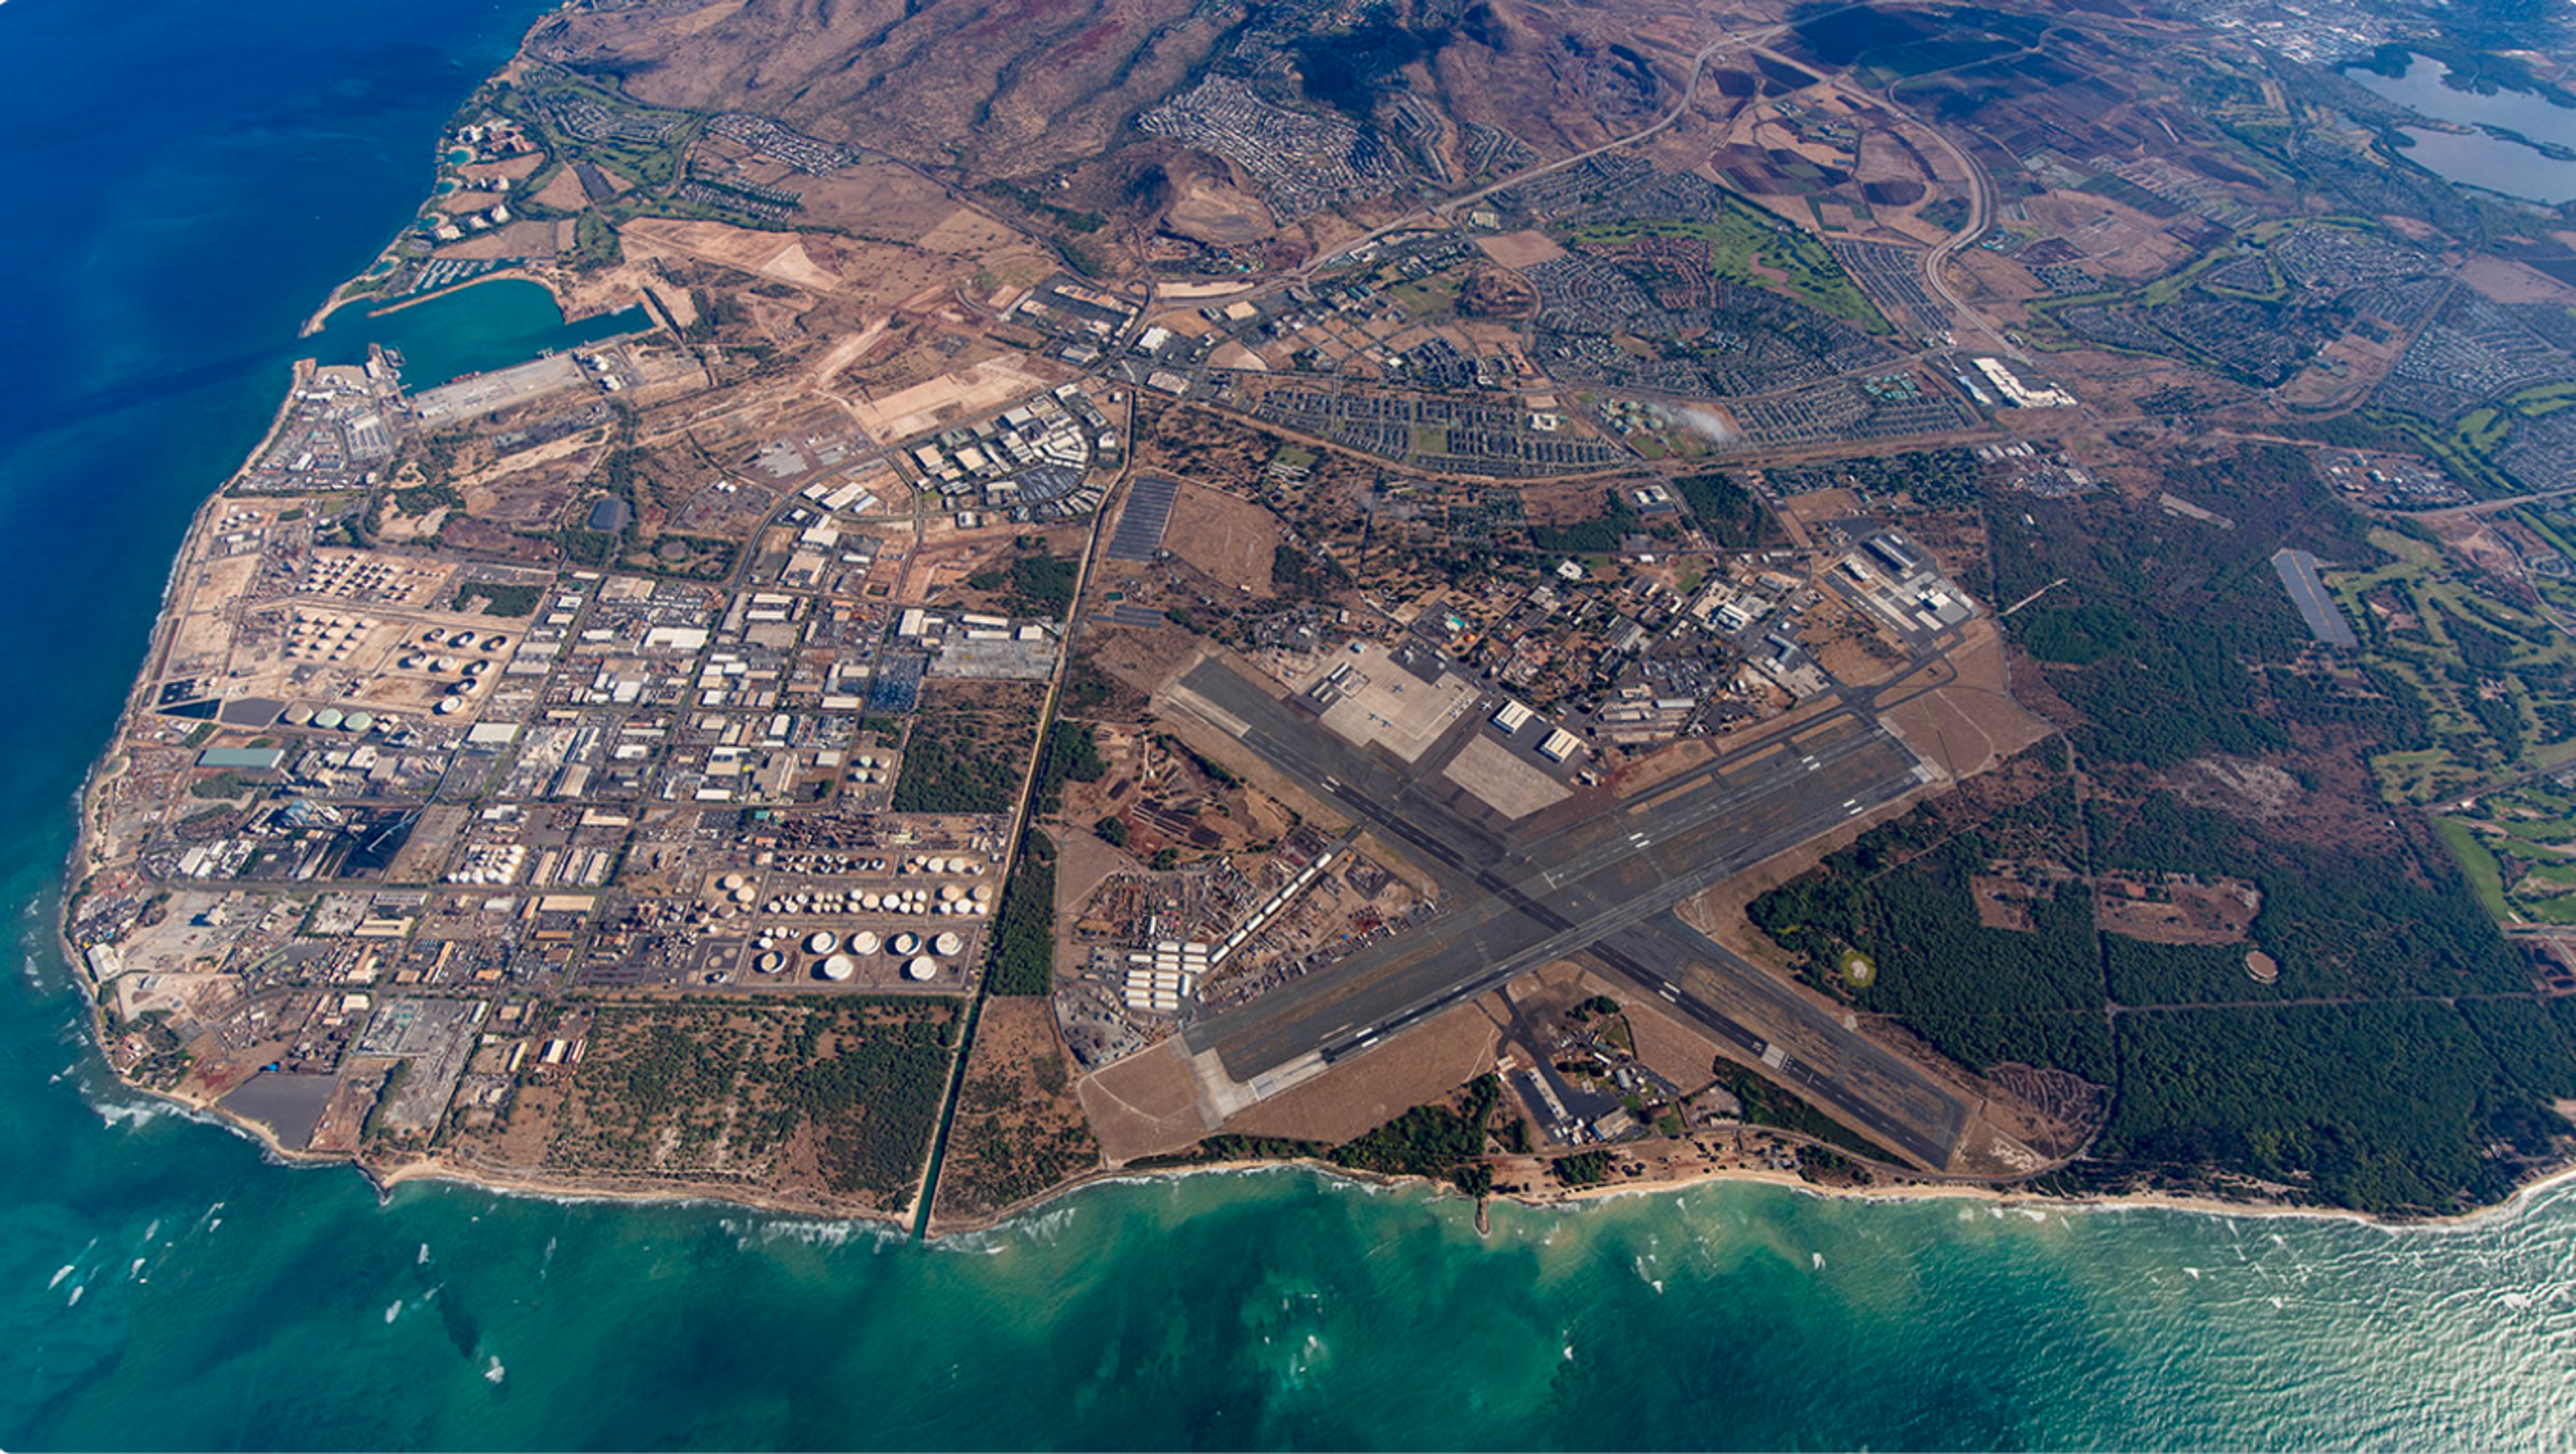 In Kalaeloa, Hawaii, Hunt is responsible for the development, revitalization and asset management of more than 500 entitled acres and 500,000 square feet of industrial and commercial space.